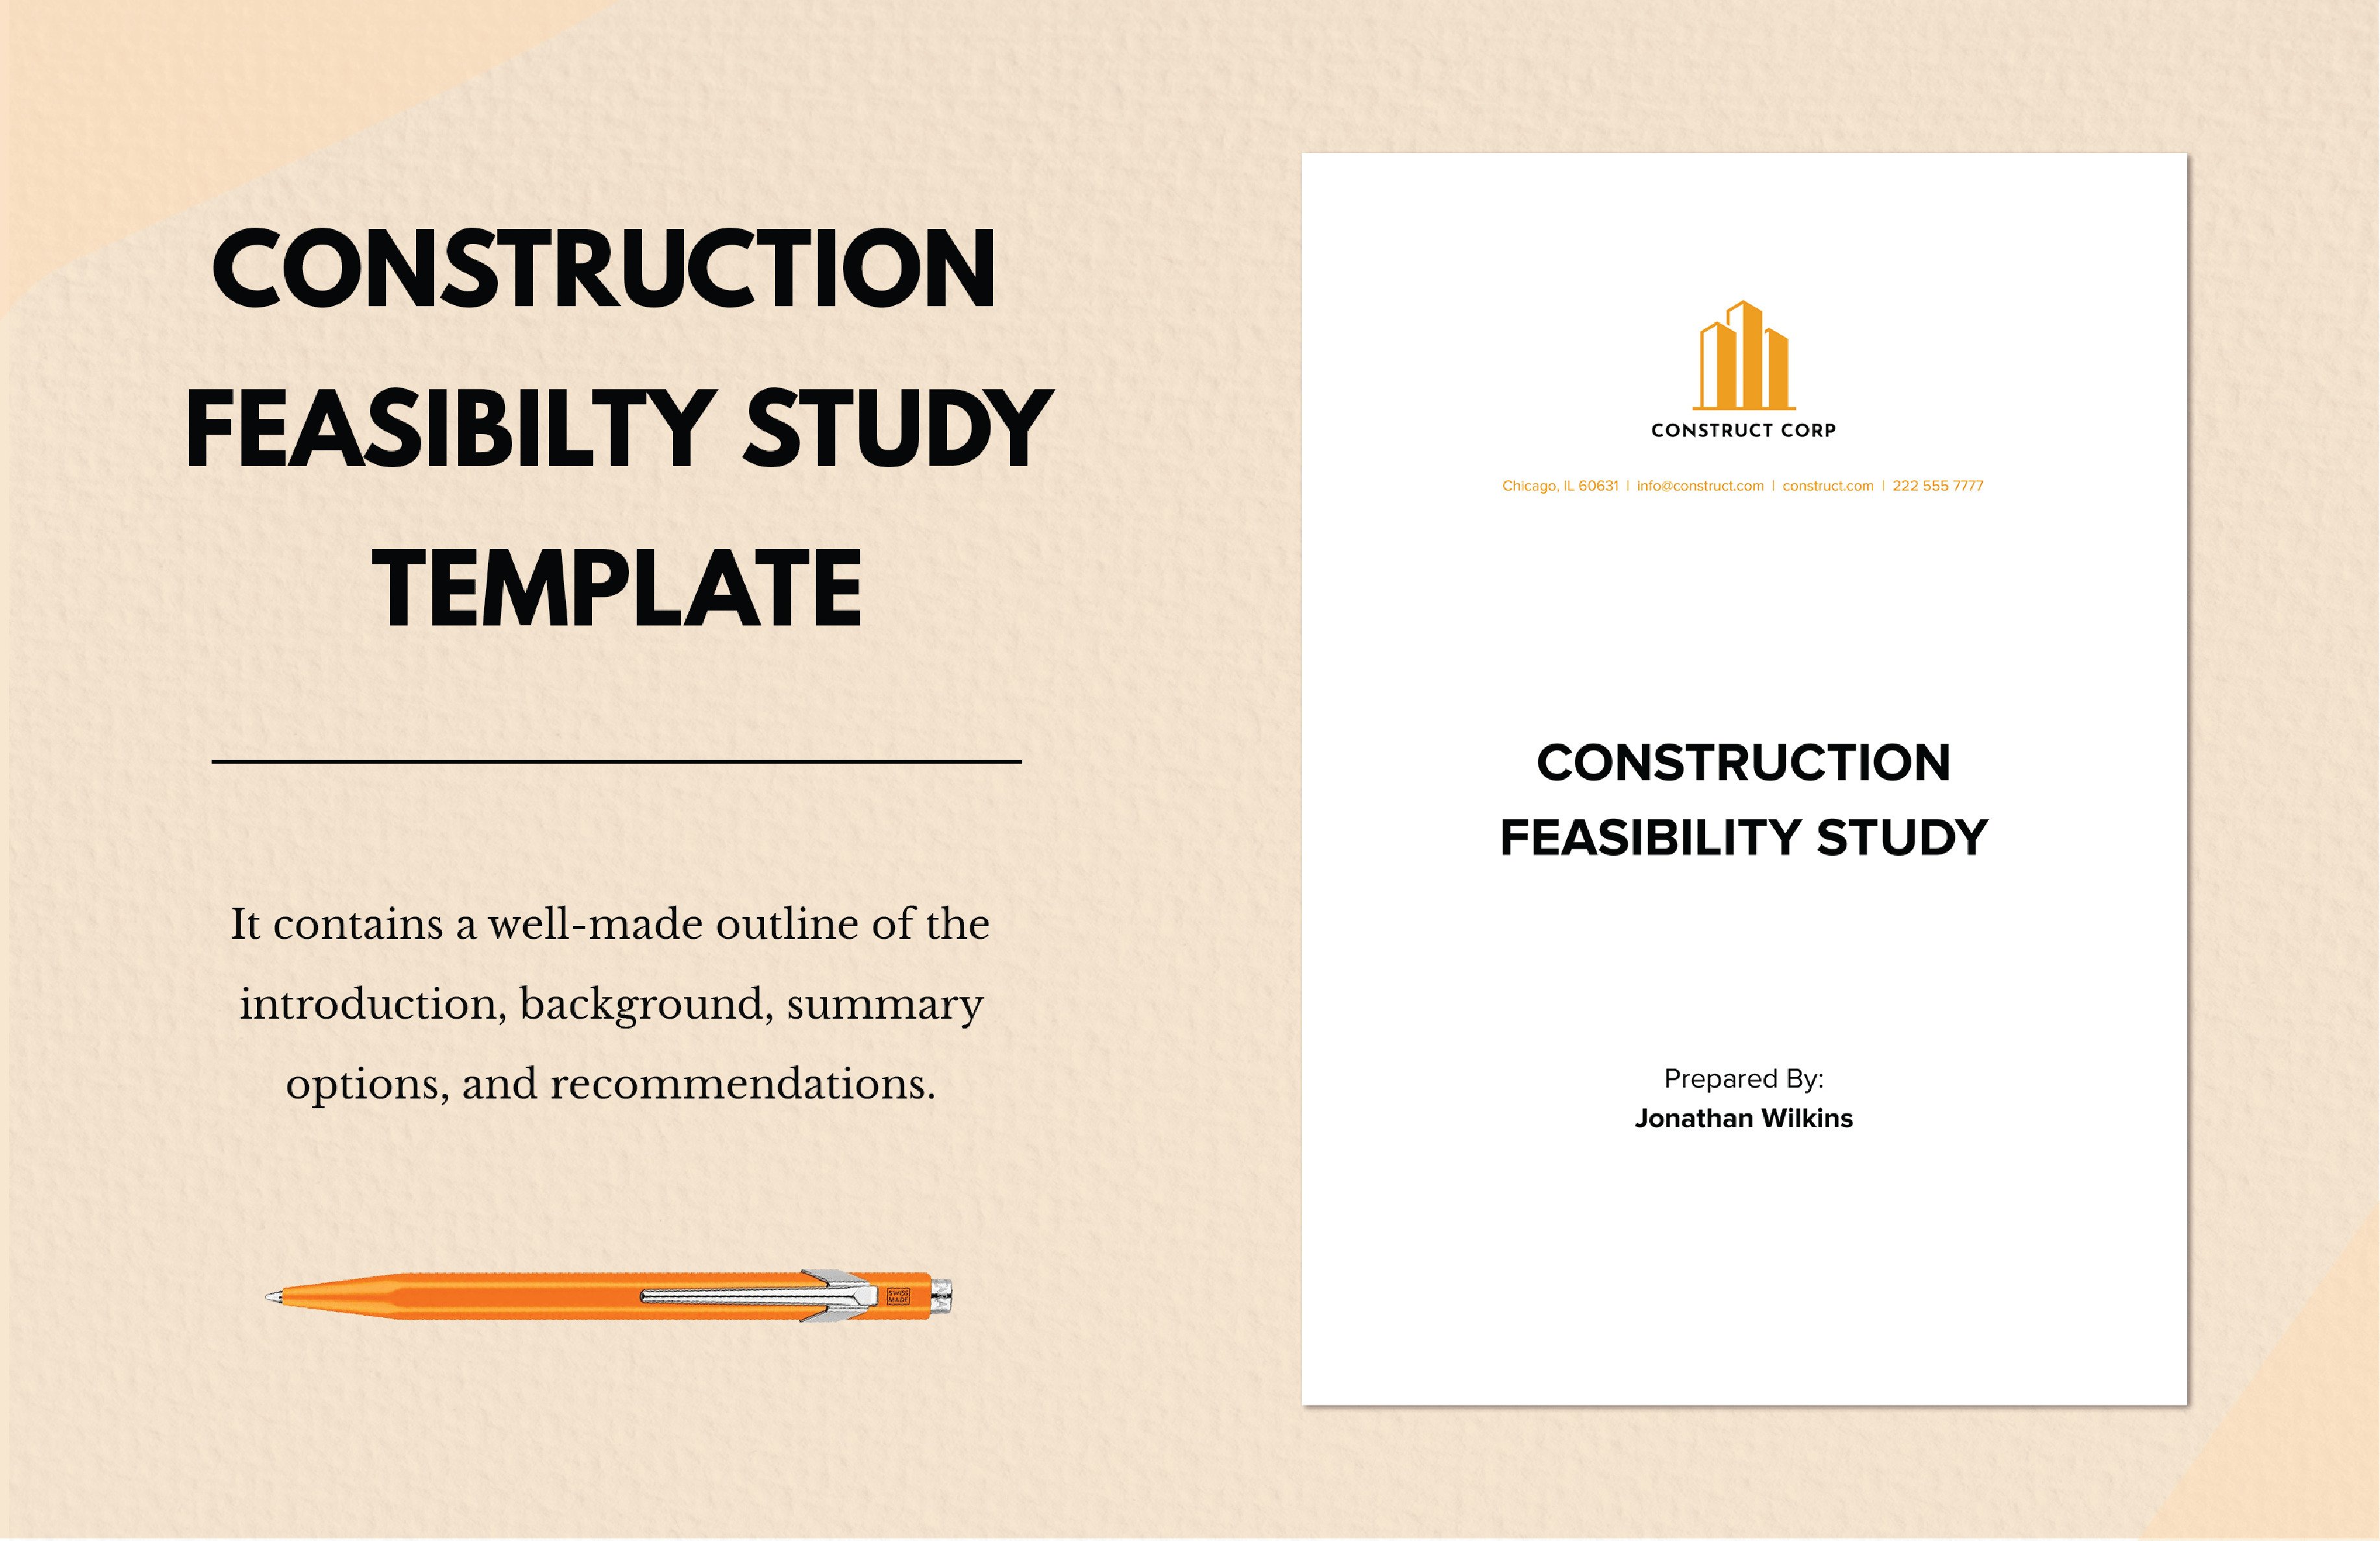 construction feasibility study ideas examples